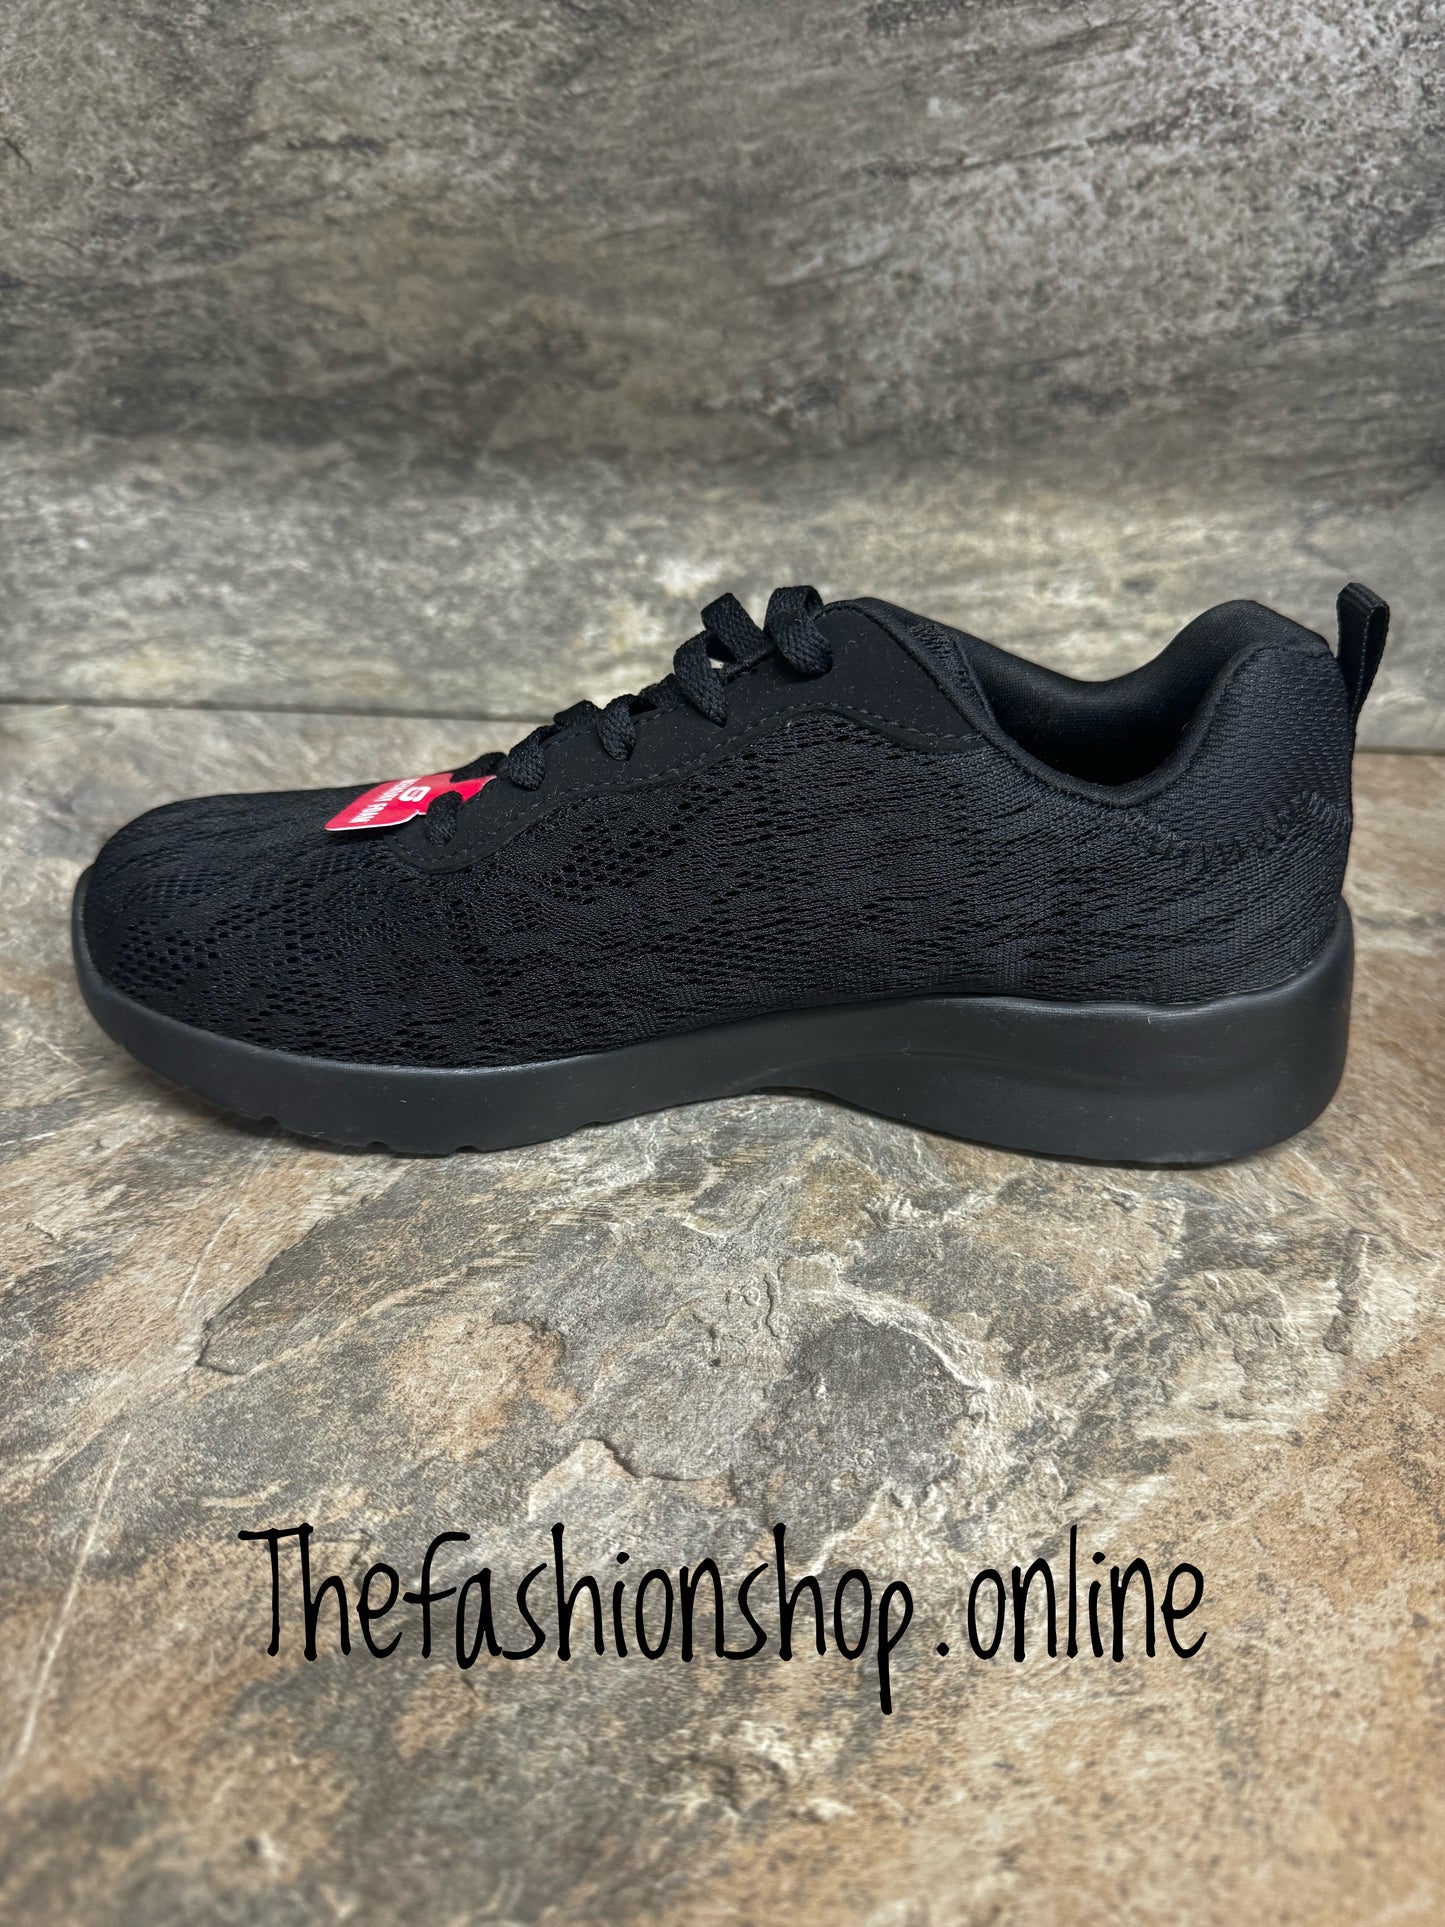 Skechers black Dynamight Homespun trainers sizes 4-8